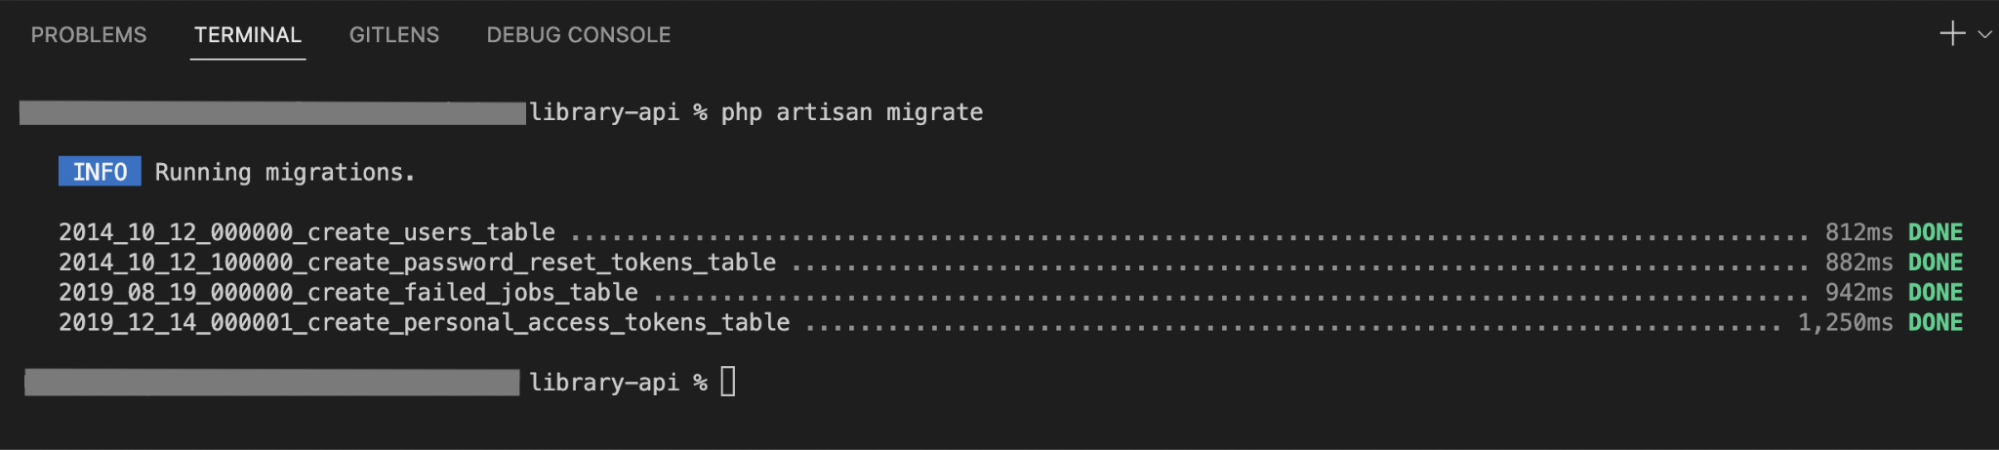 The terminal output displays the "php artisan migrate" Bash command and its output.Immediately below the command, an "INFO" label states "Running migrations."Below this are the four migrations and their statuses, listed as follows:2014_10_12_000000_create_users_table...812ms DONE.2014_10_12_100000_create_password_reset_tokens_table...882ms DONE.2019_08_19_000000_create_failed_jobs_table...942ms DONE.2019_12_14_000001_create_personal_access_tokens_table...1,250ms DONE.Below, the cursor sits on an empty command line to allow additional input.